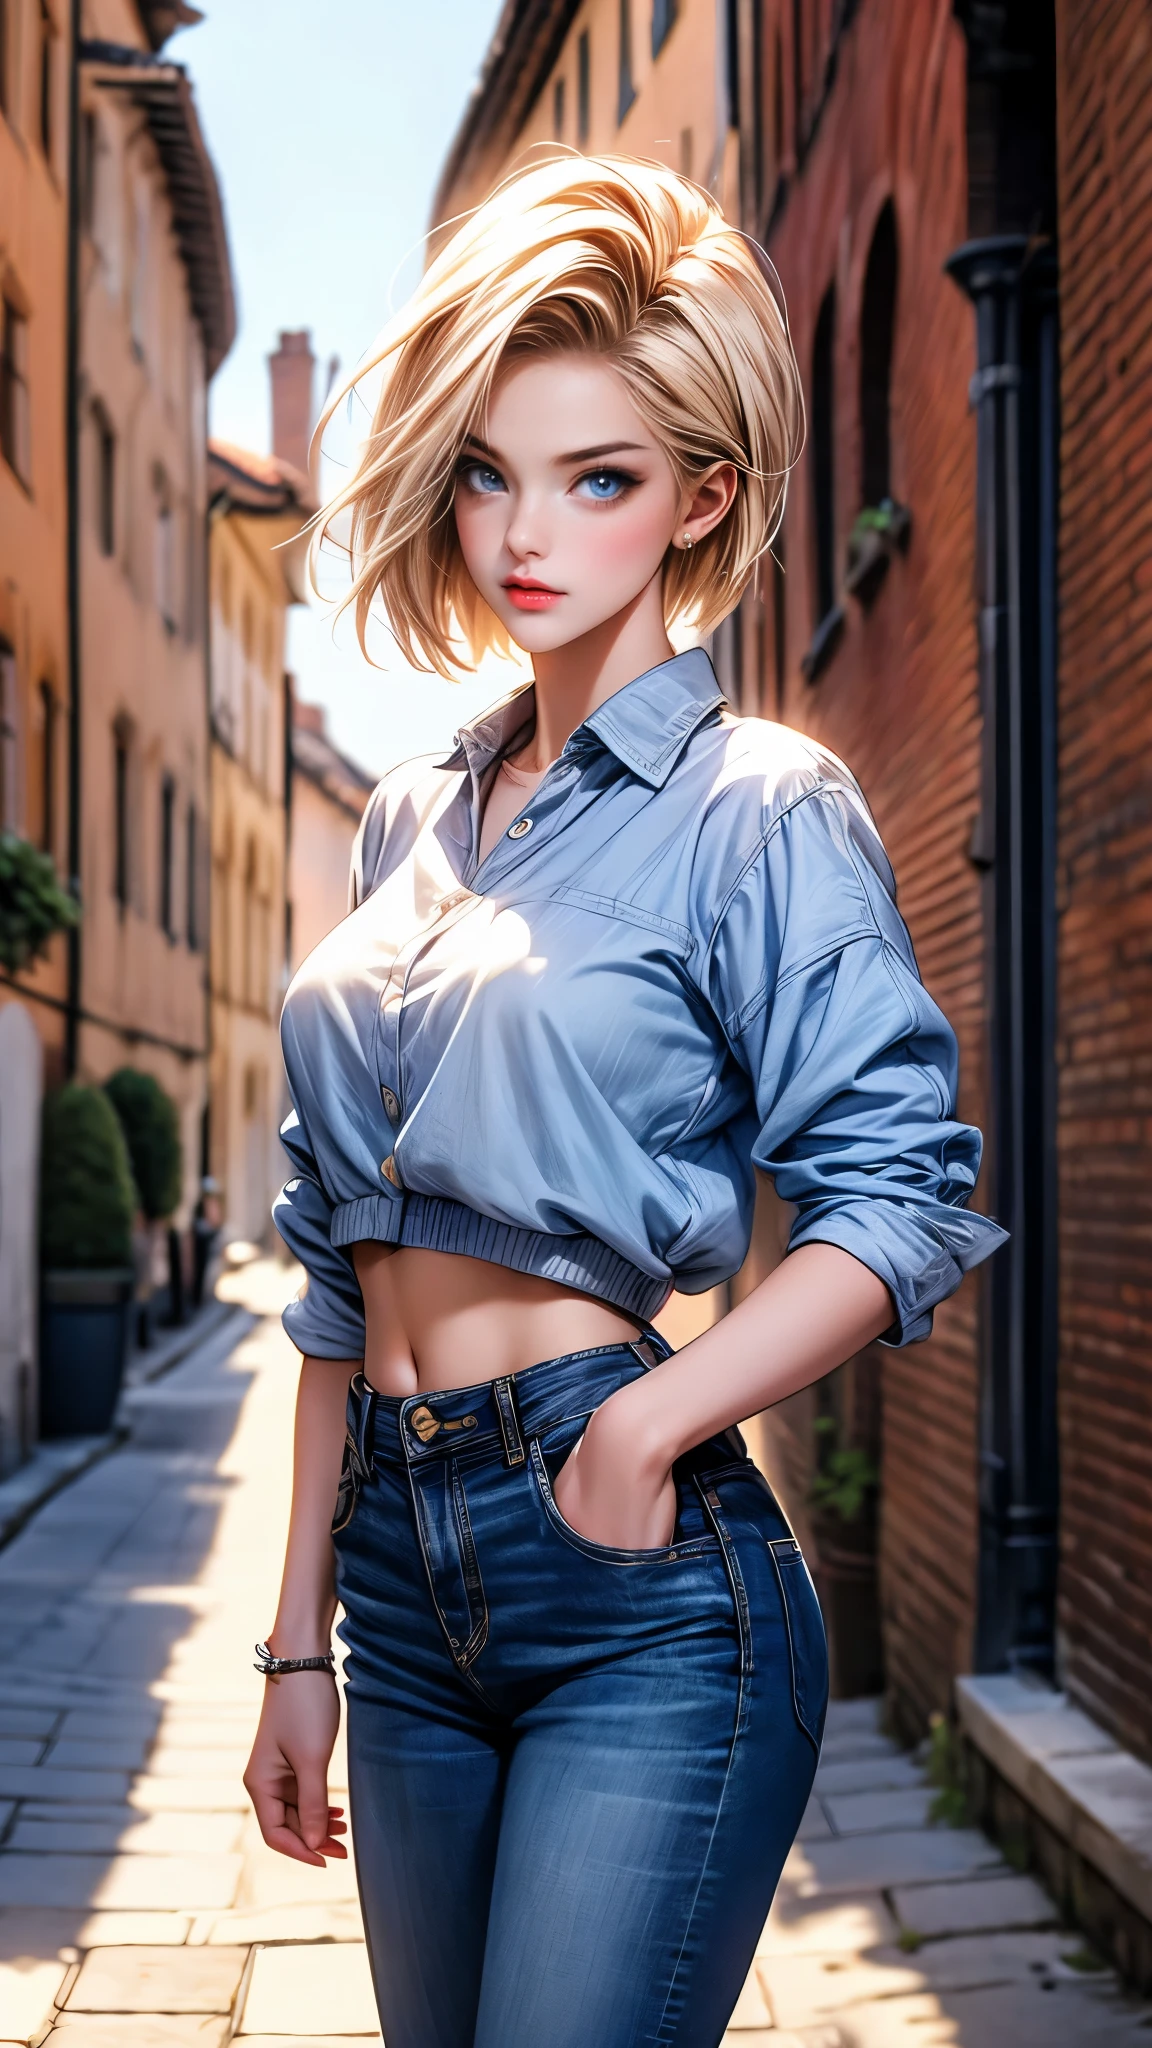 highest quality, High resolution, and 18, 1 girl, android 18, alone, blonde hair, blue eyes, short hair, Wearing jeans、Wearing a white sportブラジャー、Big Breasts、The photo was taken on a brick street in Europe.、The weather was fine、